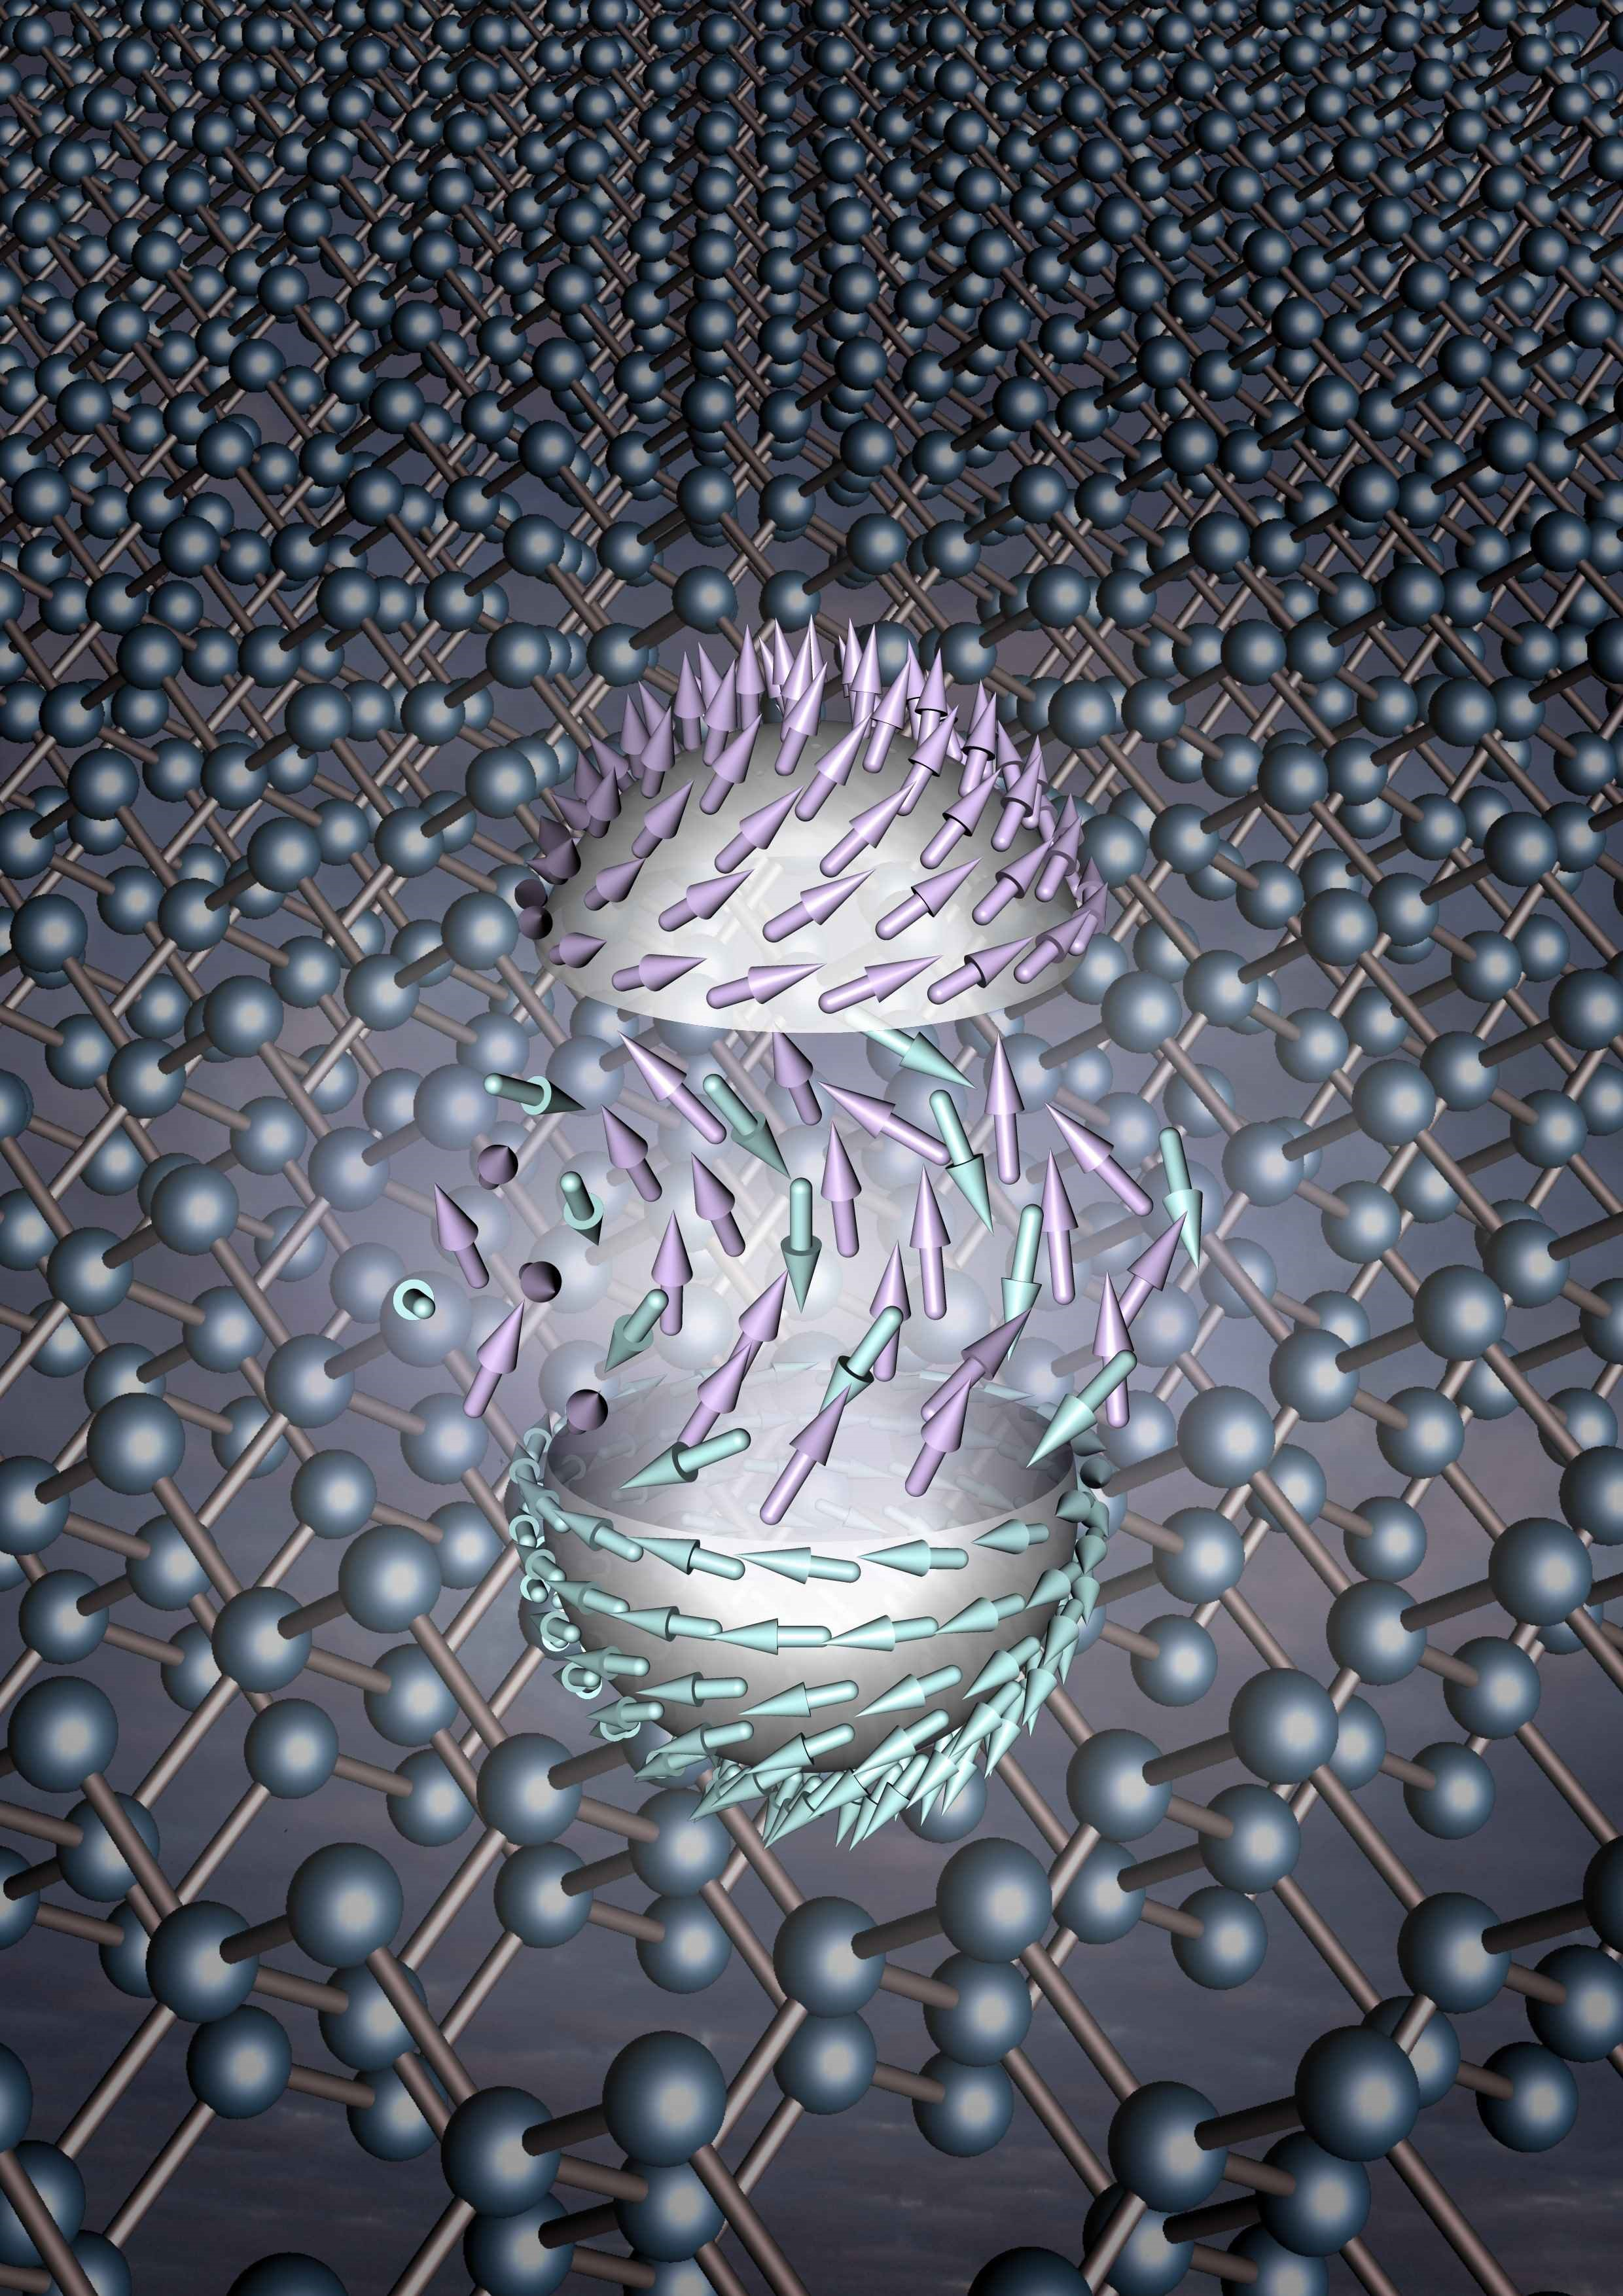 Skyrmions are nanoscale vortices in the magnetic alignment of atoms